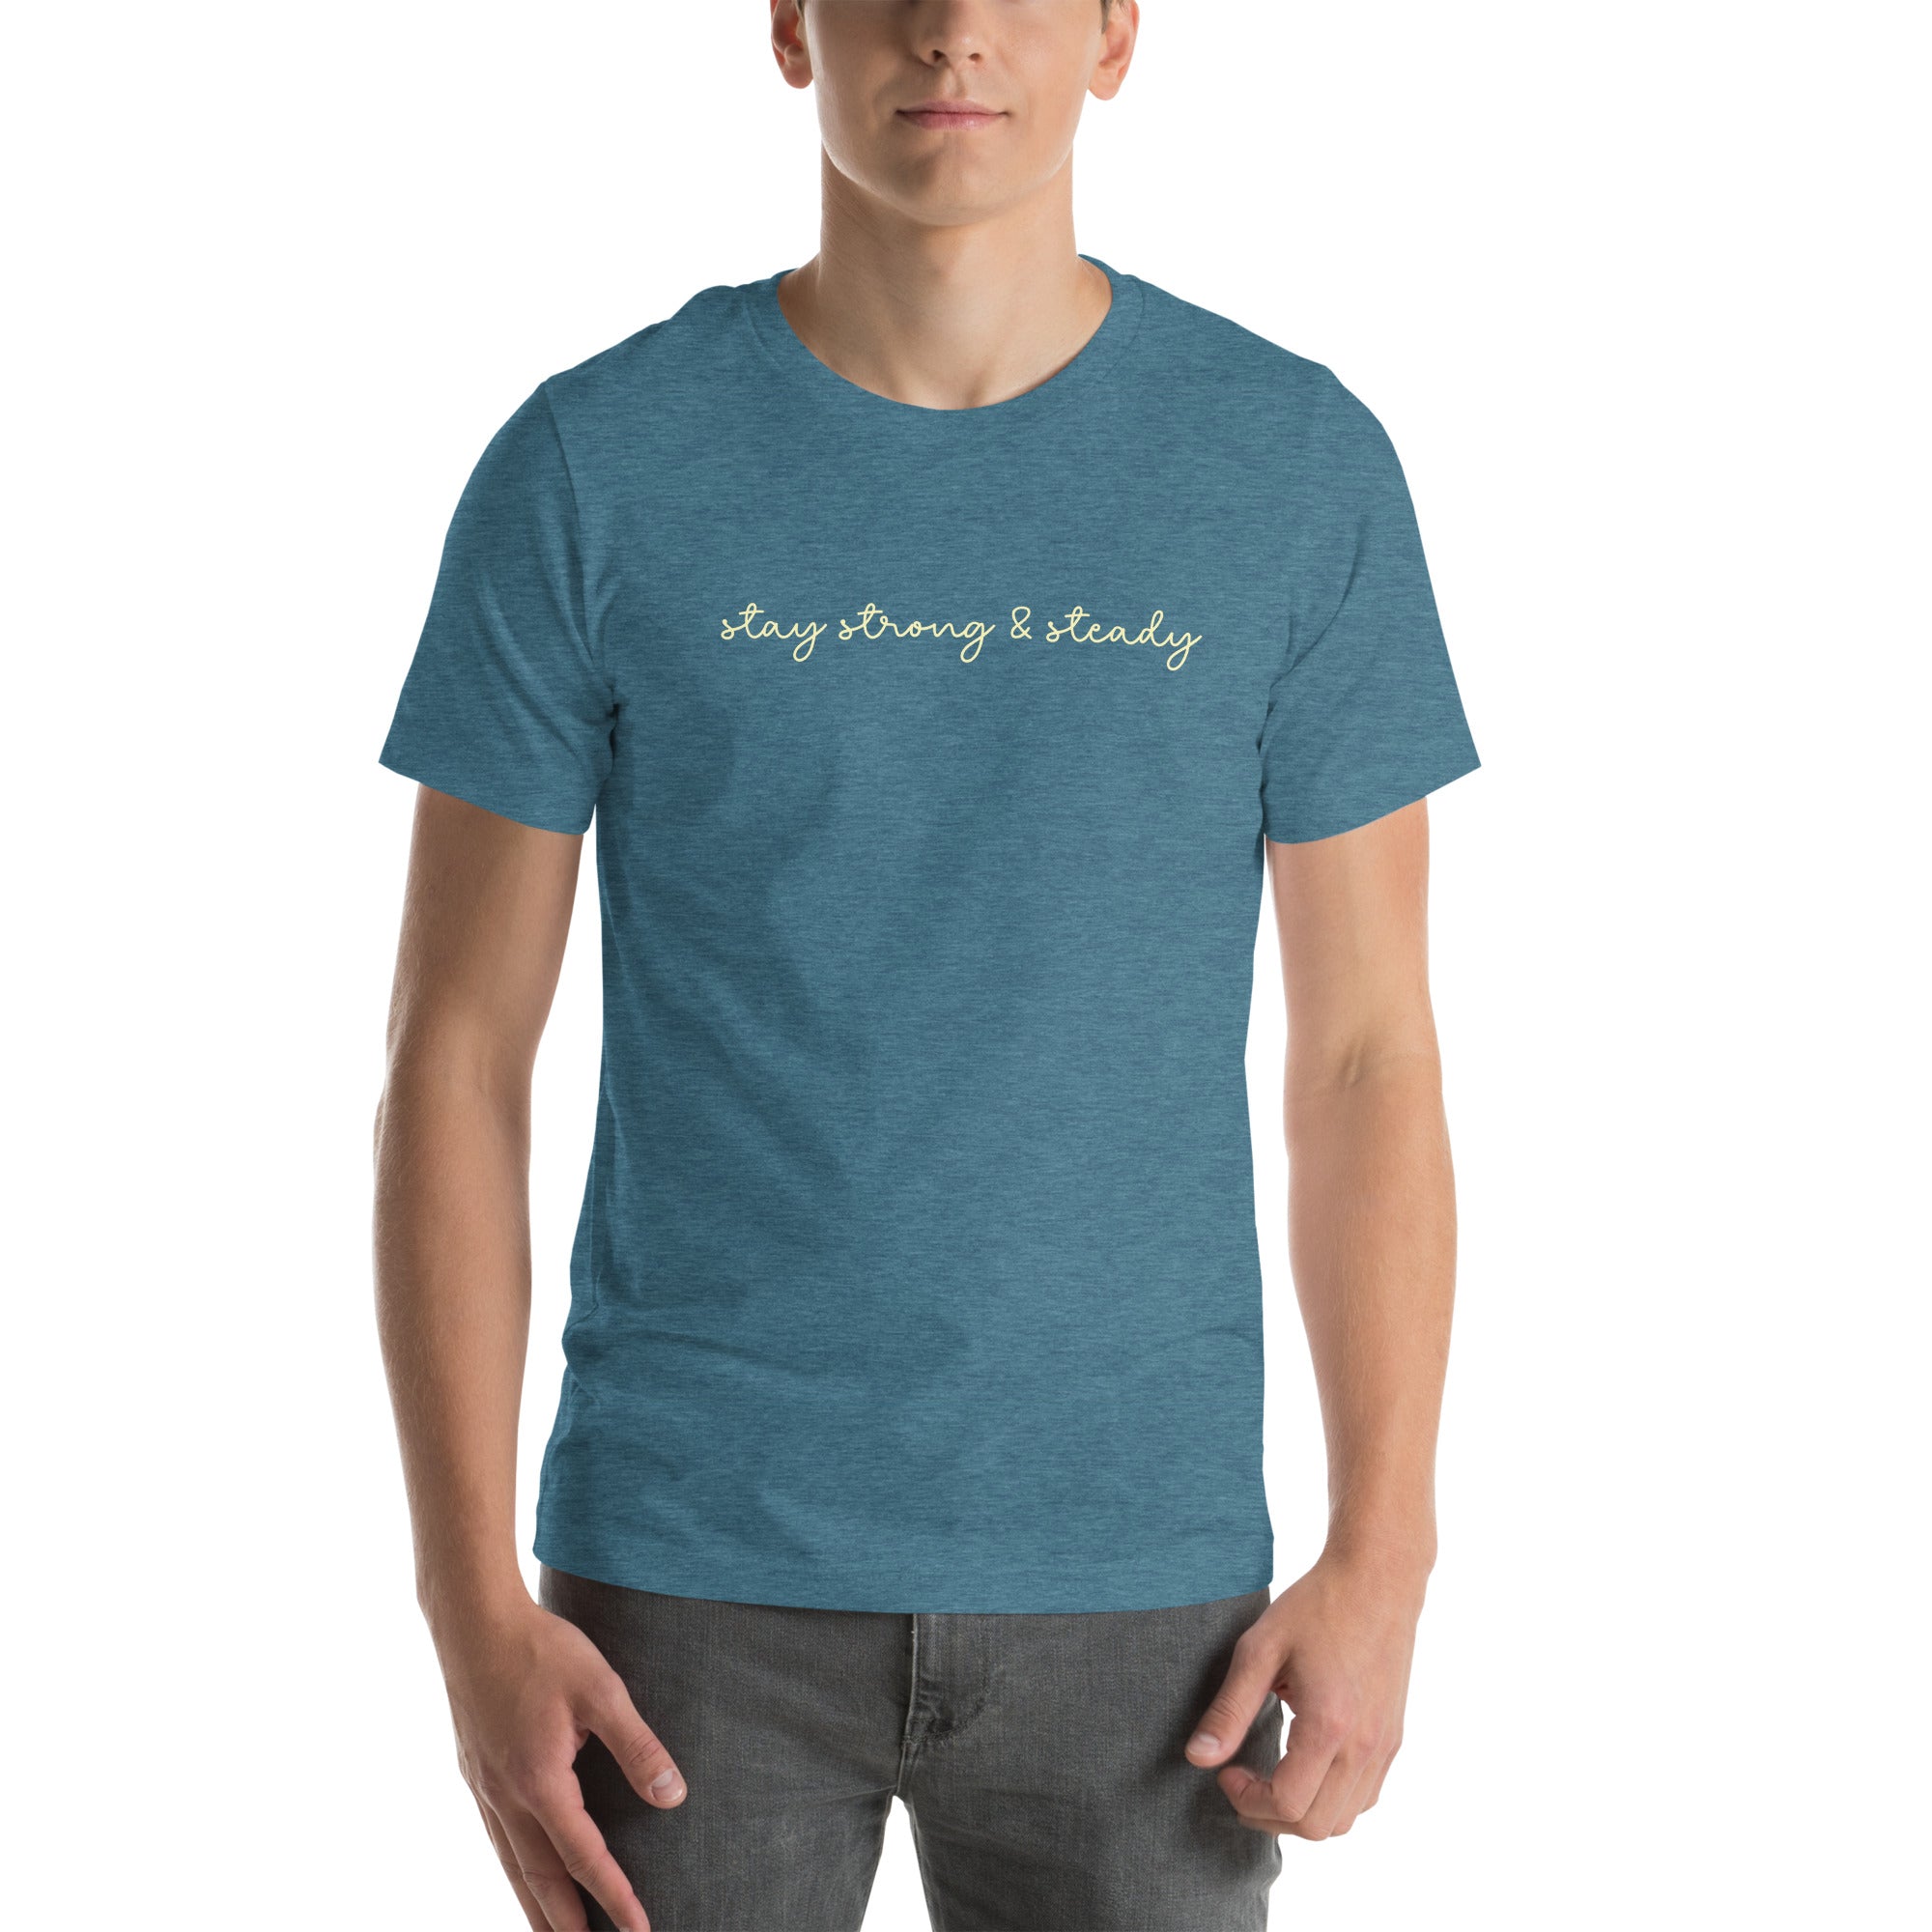 Strong And Steady, Premium Short-Sleeve Unisex T-Shirt | Positive Affirmation Tee